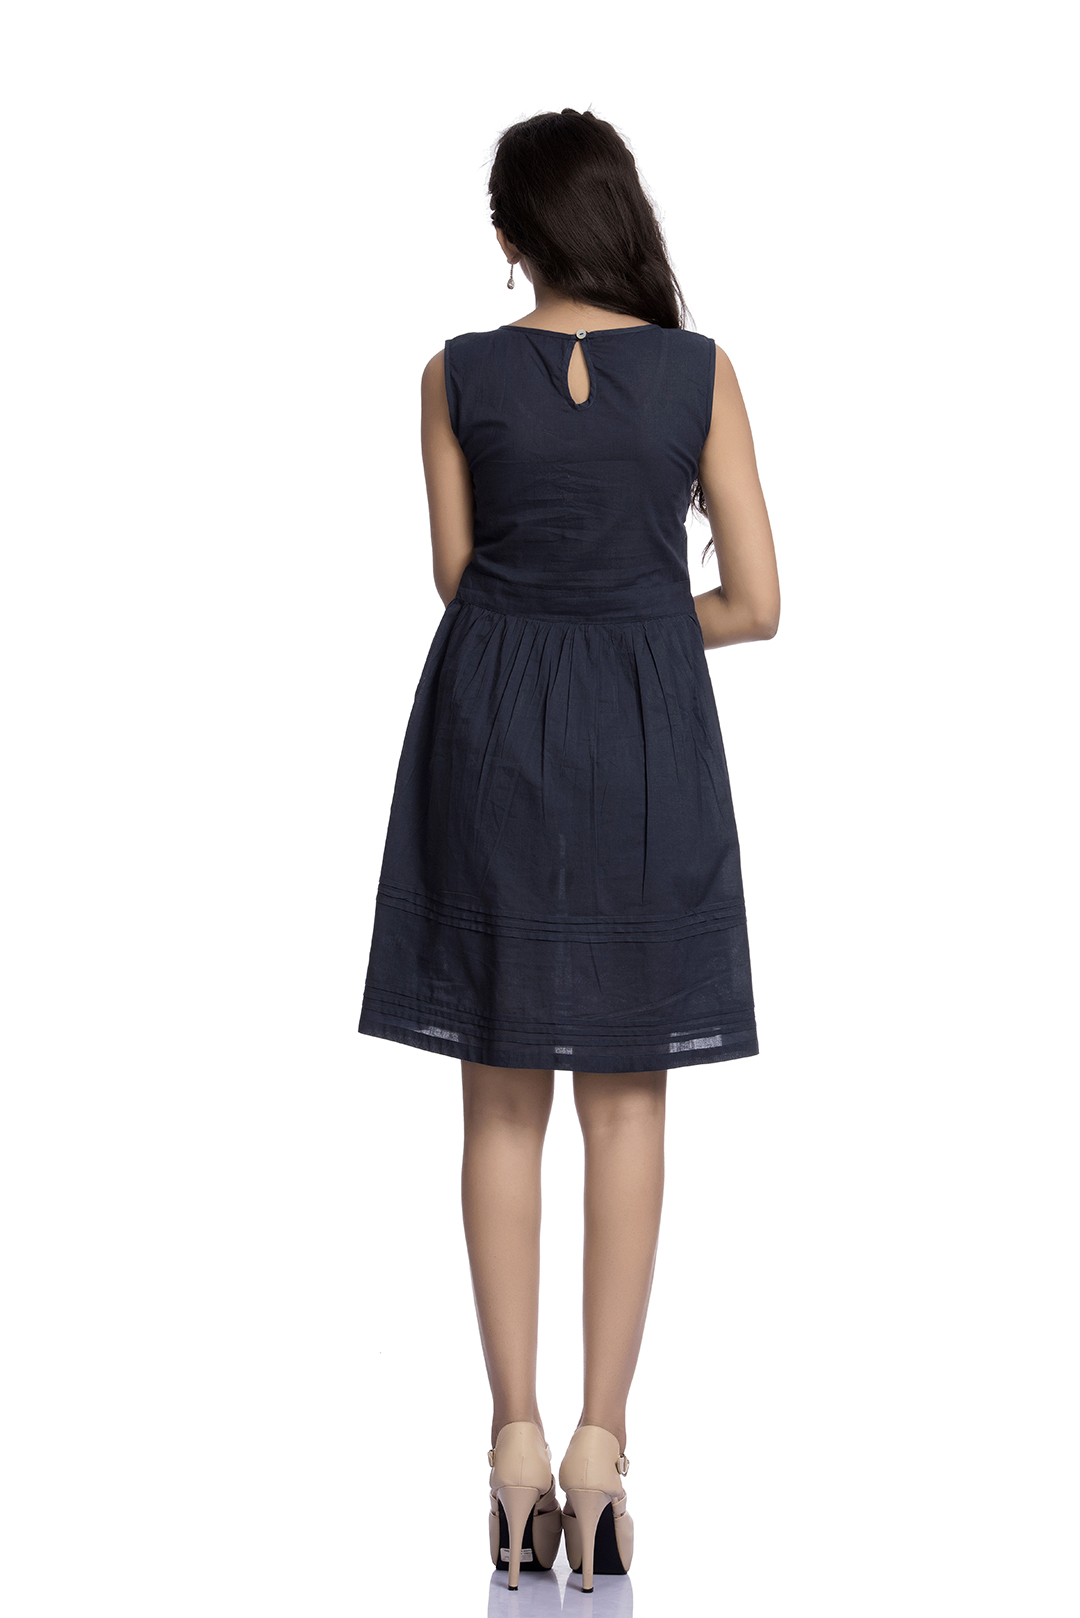 Navy blue mini dress with Lucknowi Chikan Embroidery | EnBFashion